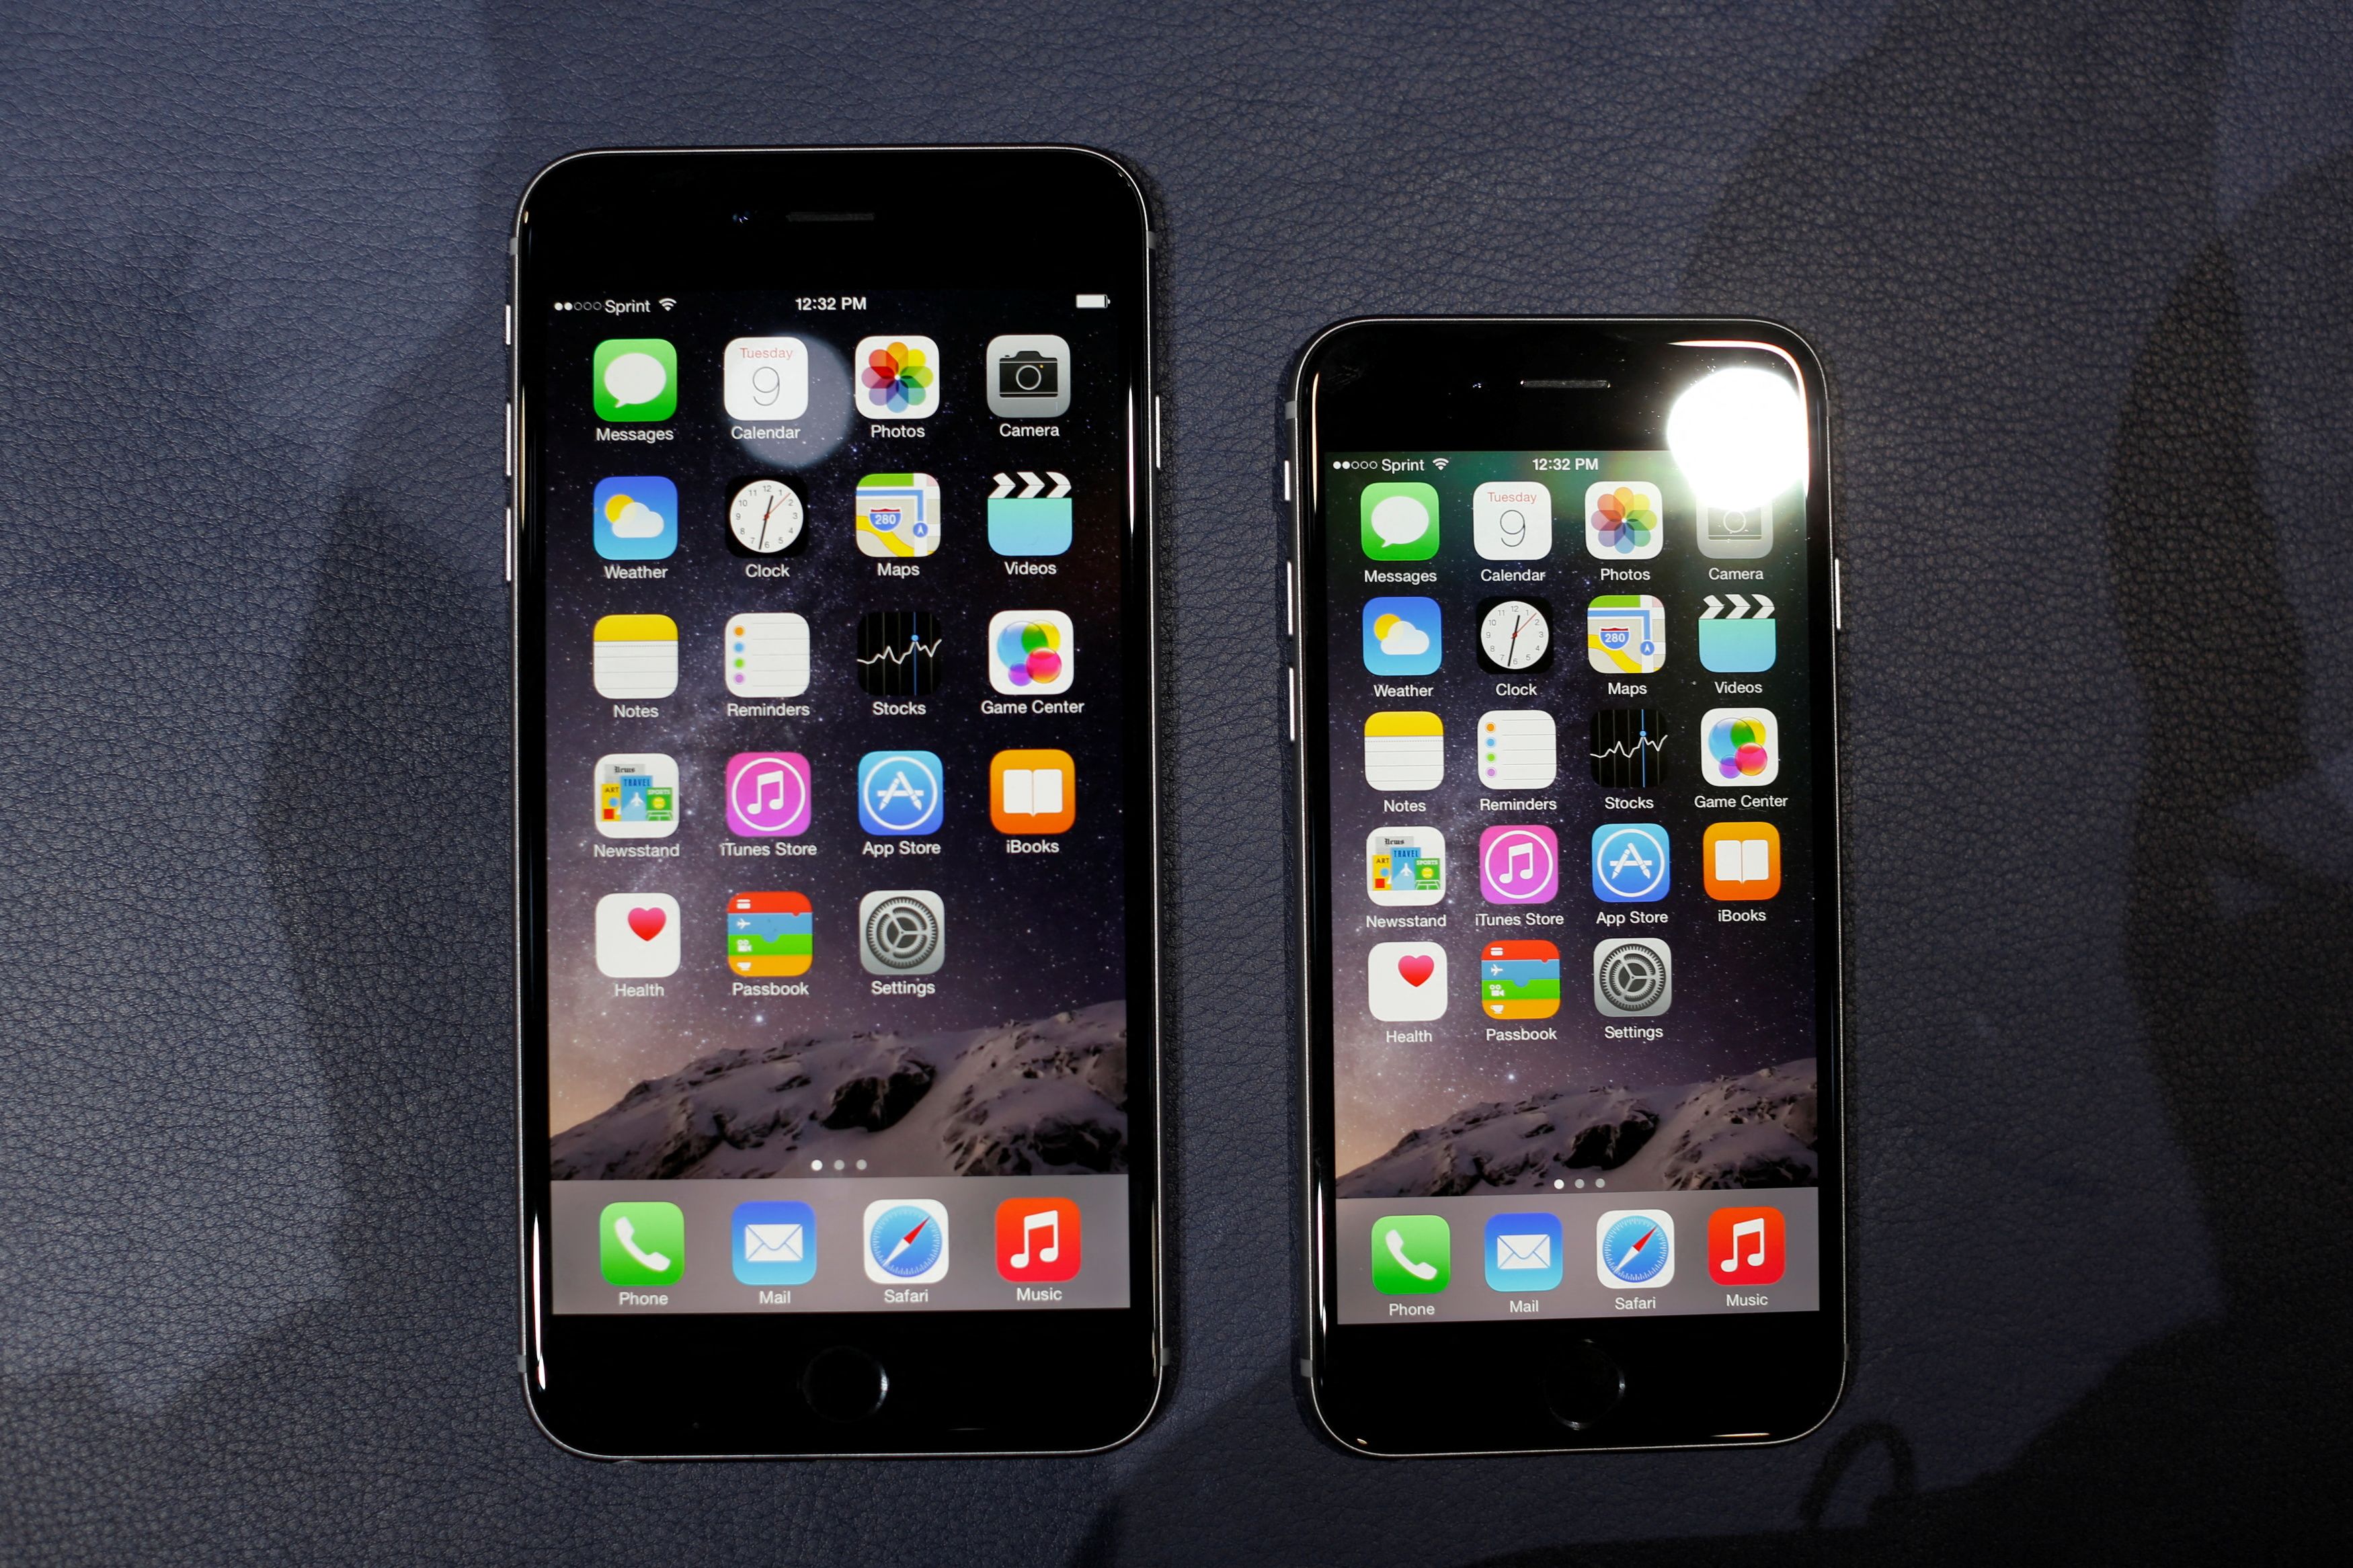 The iPhone 6 and the iPhone 6 Plus in Cupertino, California, September 9, 2014. REUTERS/Stephen Lam/File Photo